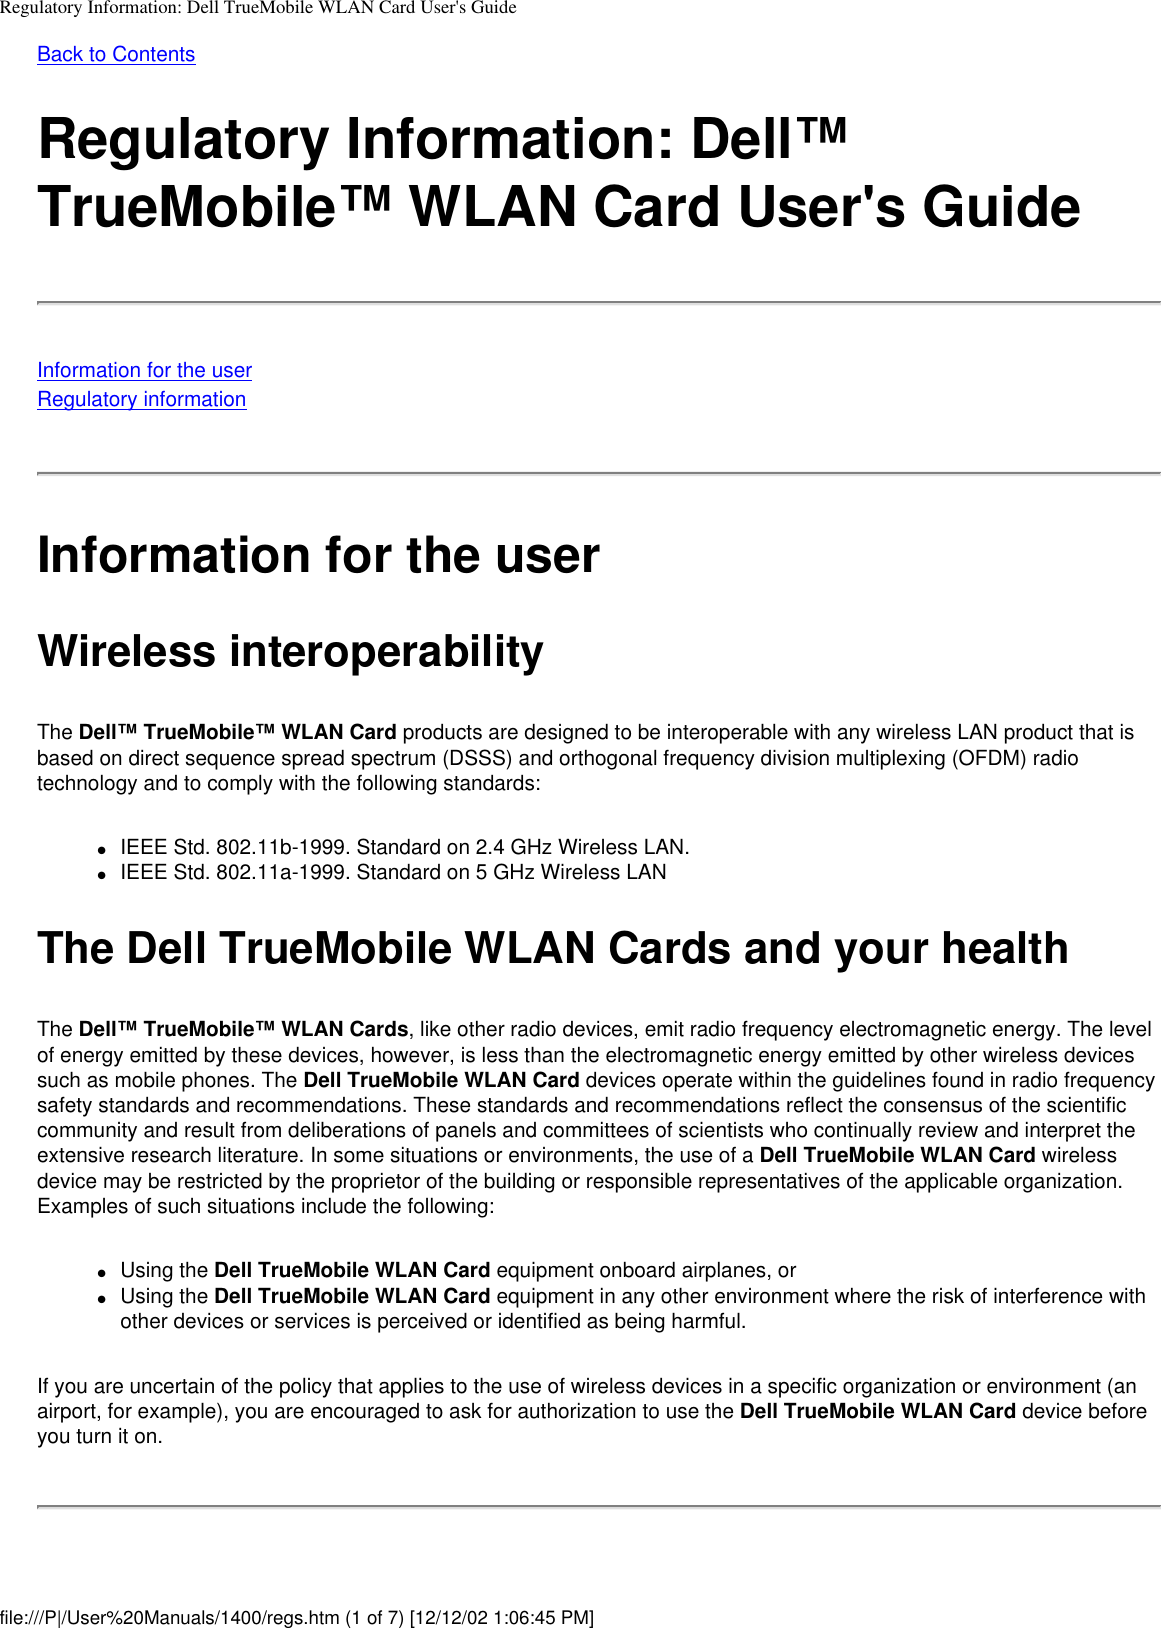 Regulatory Information: Dell TrueMobile WLAN Card User&apos;s GuideBack to ContentsRegulatory Information: Dell™ TrueMobile™ WLAN Card User&apos;s GuideInformation for the userRegulatory informationInformation for the userWireless interoperabilityThe Dell™ TrueMobile™ WLAN Card products are designed to be interoperable with any wireless LAN product that is based on direct sequence spread spectrum (DSSS) and orthogonal frequency division multiplexing (OFDM) radio technology and to comply with the following standards:●     IEEE Std. 802.11b-1999. Standard on 2.4 GHz Wireless LAN.●     IEEE Std. 802.11a-1999. Standard on 5 GHz Wireless LANThe Dell TrueMobile WLAN Cards and your healthThe Dell™ TrueMobile™ WLAN Cards, like other radio devices, emit radio frequency electromagnetic energy. The level of energy emitted by these devices, however, is less than the electromagnetic energy emitted by other wireless devices such as mobile phones. The Dell TrueMobile WLAN Card devices operate within the guidelines found in radio frequency safety standards and recommendations. These standards and recommendations reflect the consensus of the scientific community and result from deliberations of panels and committees of scientists who continually review and interpret the extensive research literature. In some situations or environments, the use of a Dell TrueMobile WLAN Card wireless device may be restricted by the proprietor of the building or responsible representatives of the applicable organization. Examples of such situations include the following:●     Using the Dell TrueMobile WLAN Card equipment onboard airplanes, or●     Using the Dell TrueMobile WLAN Card equipment in any other environment where the risk of interference with other devices or services is perceived or identified as being harmful.If you are uncertain of the policy that applies to the use of wireless devices in a specific organization or environment (an airport, for example), you are encouraged to ask for authorization to use the Dell TrueMobile WLAN Card device before you turn it on.file:///P|/User%20Manuals/1400/regs.htm (1 of 7) [12/12/02 1:06:45 PM]